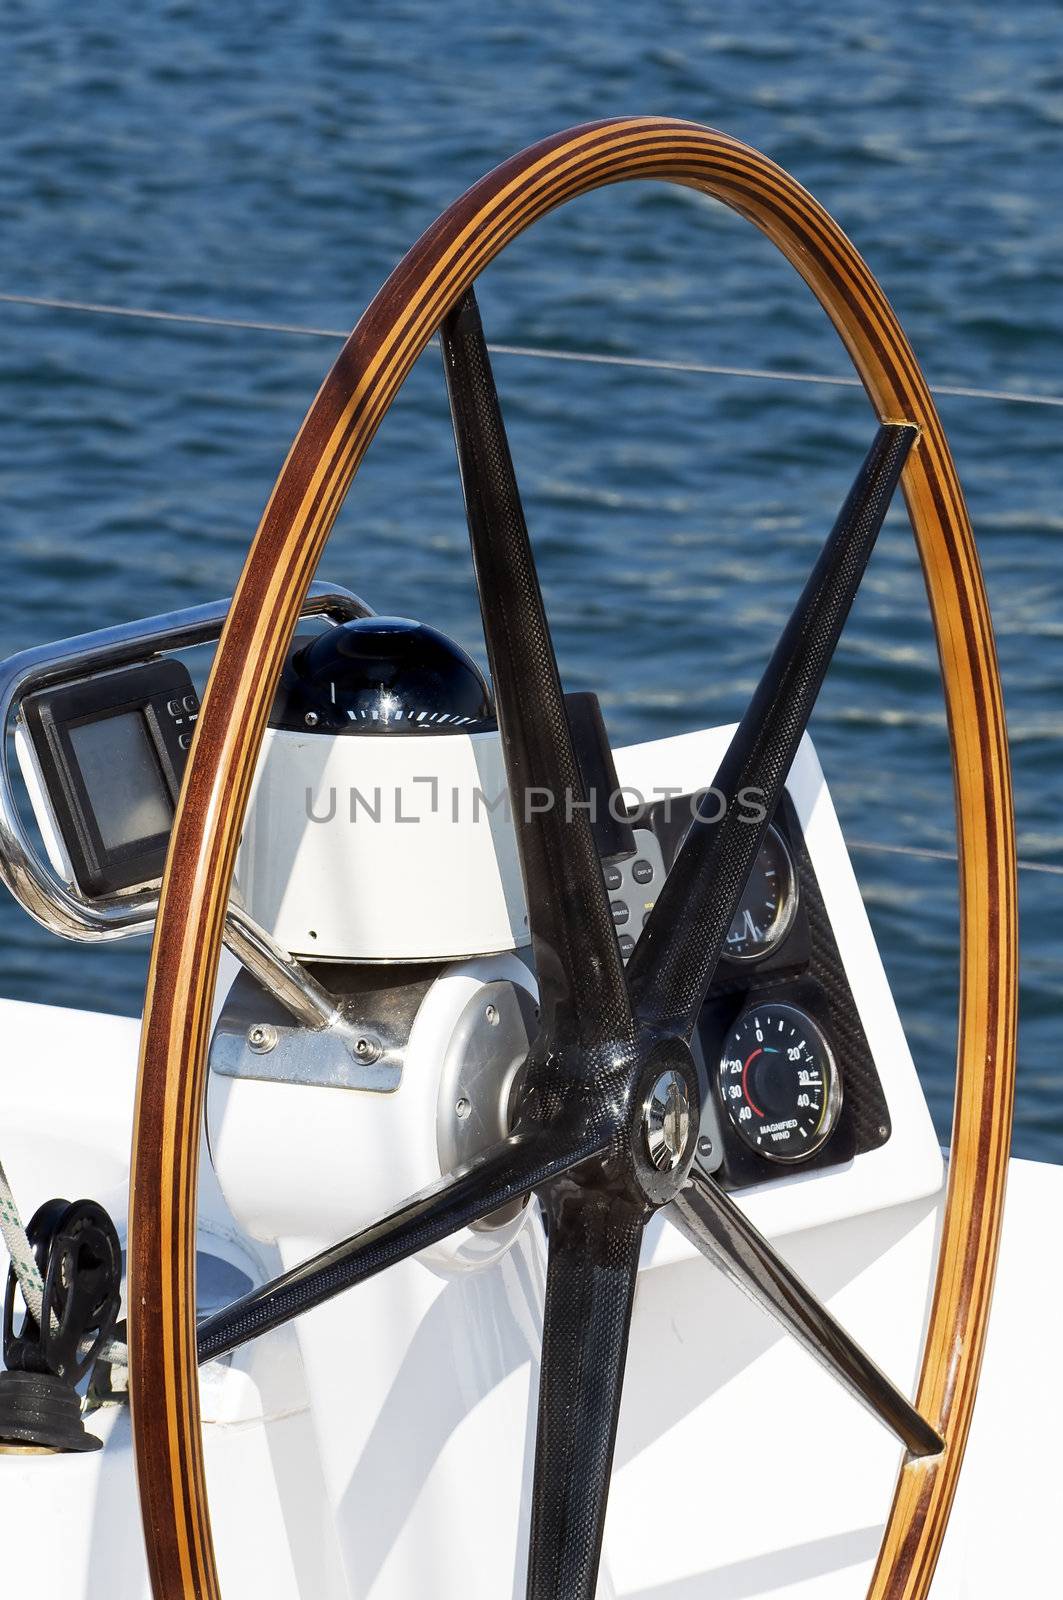 Detail of rudder, compass and nautical instruments of a sailing boat